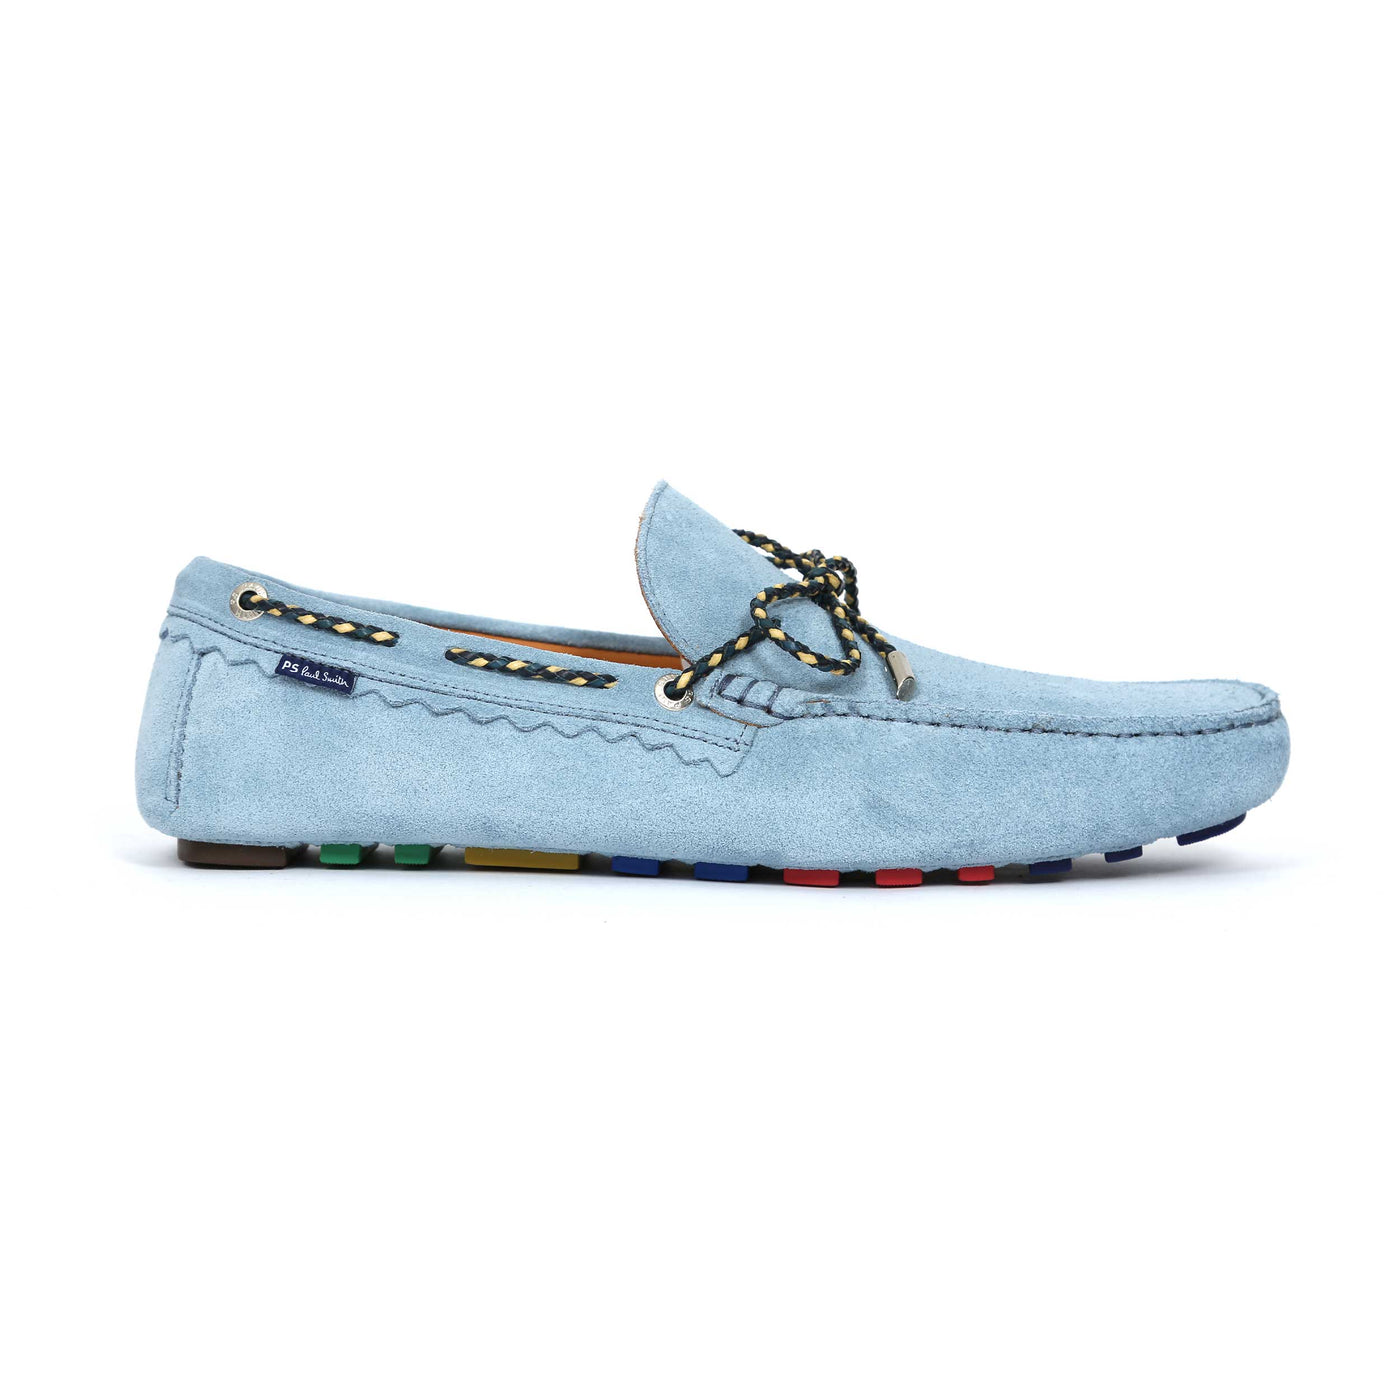 Paul Smith Springfield Loafer in Light Blue